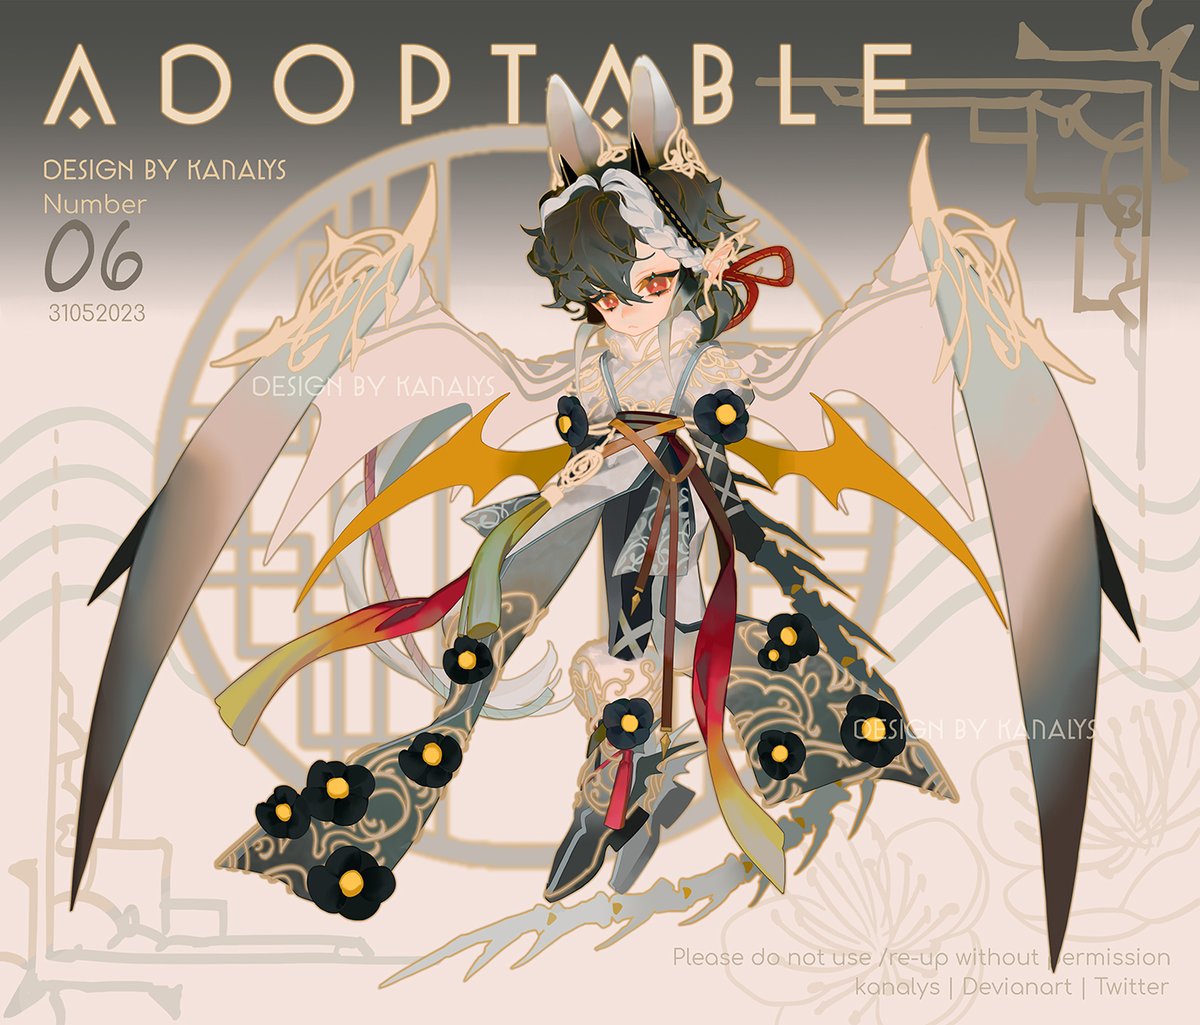 Adoptable no.06
The auction is going on.